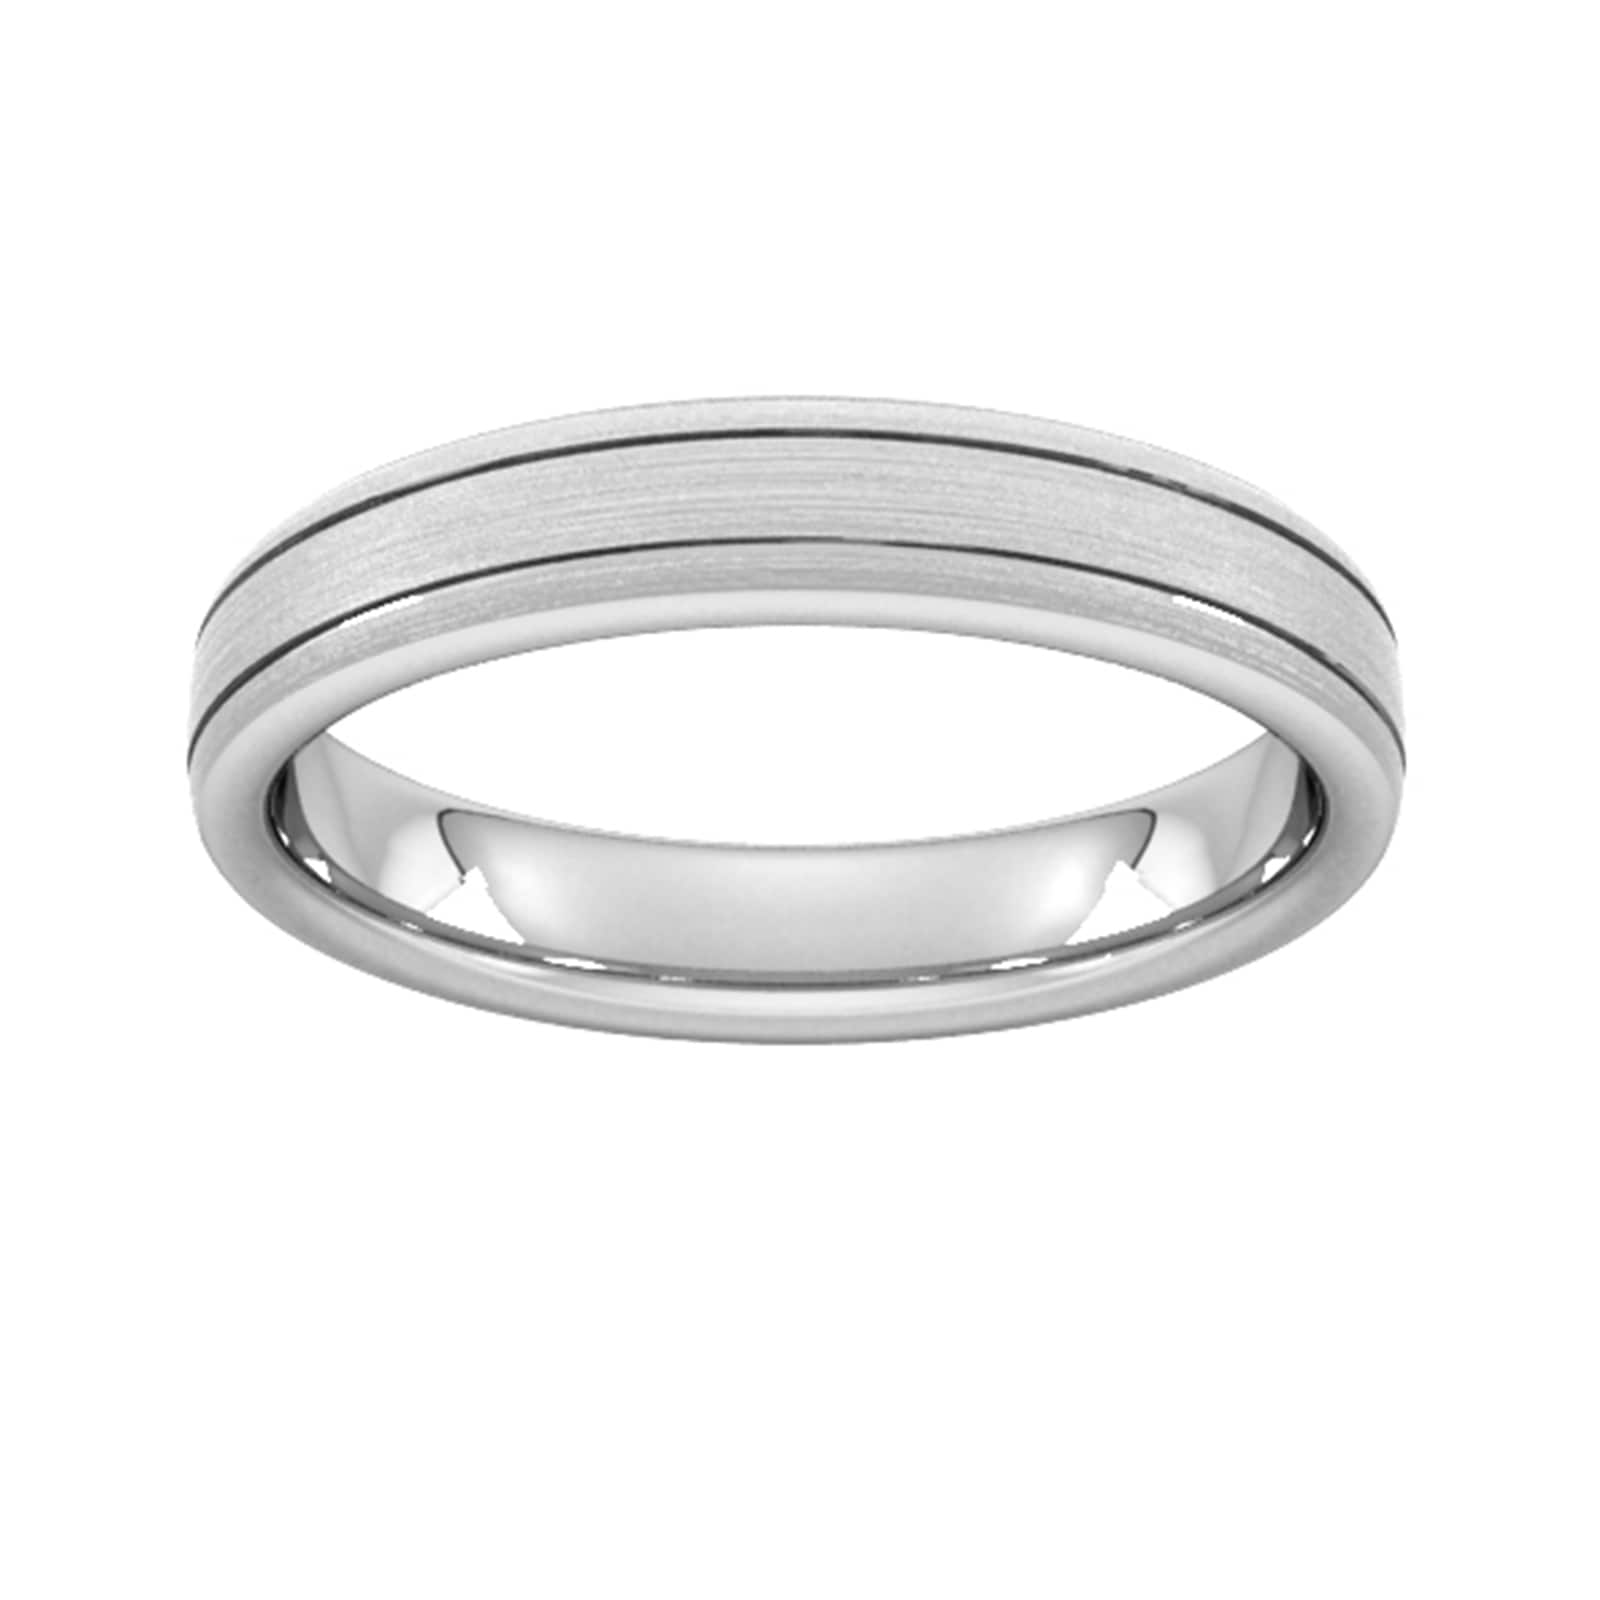 4mm Flat Court Heavy Matt Finish With Double Grooves Wedding Ring In Platinum - Ring Size K